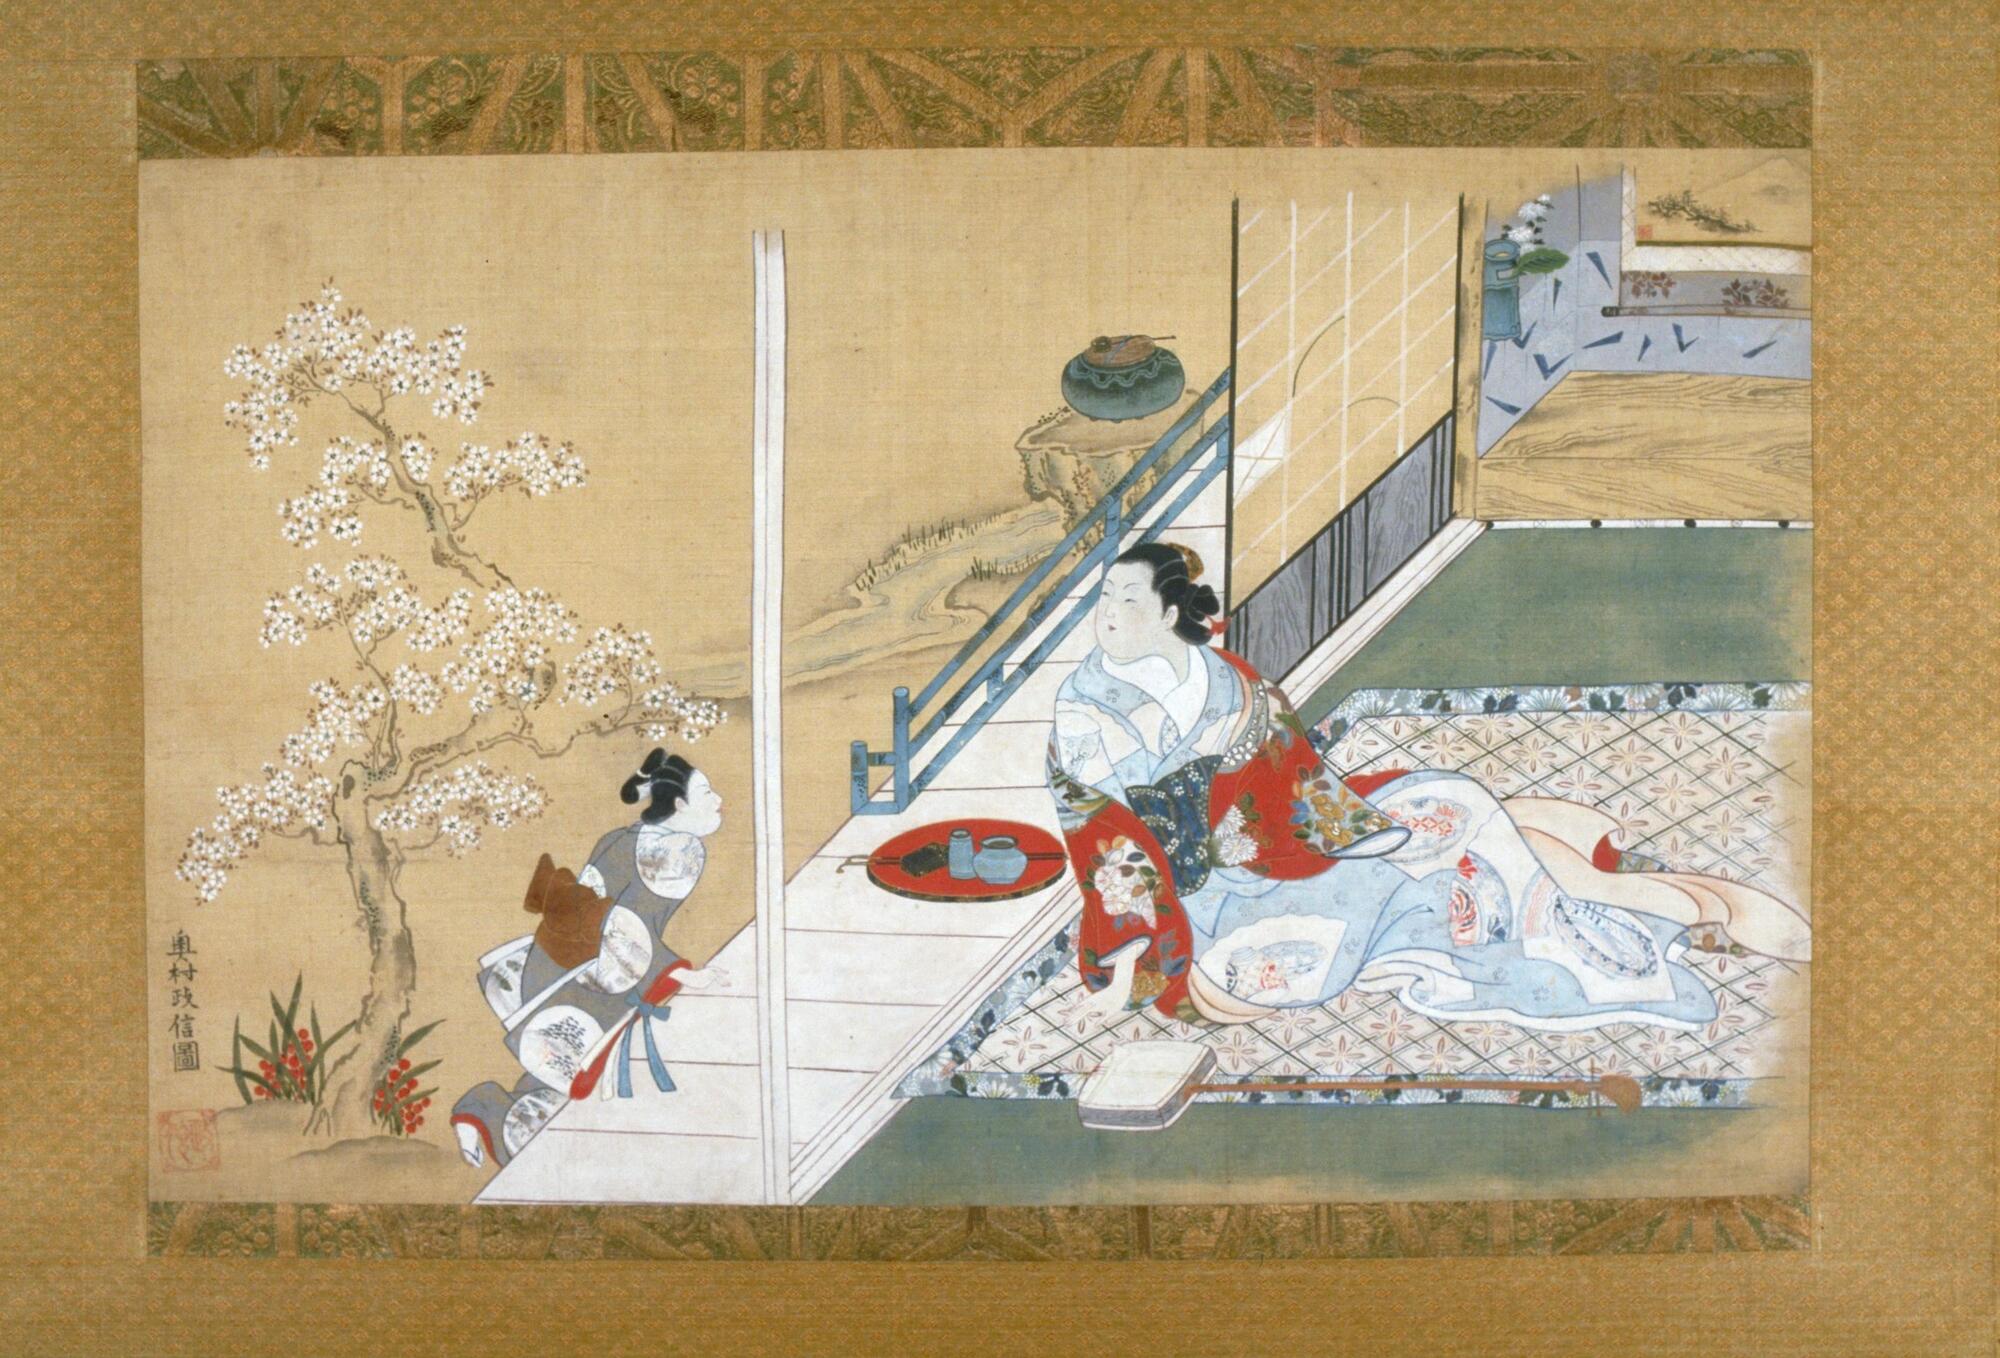 A colored image depicting a woman lounging in her chambers. She wears a kimono of red and blue with an artistic stylized pattern. Outside is a cherry tree blooming and the woman's young attendant in a grey kimono.